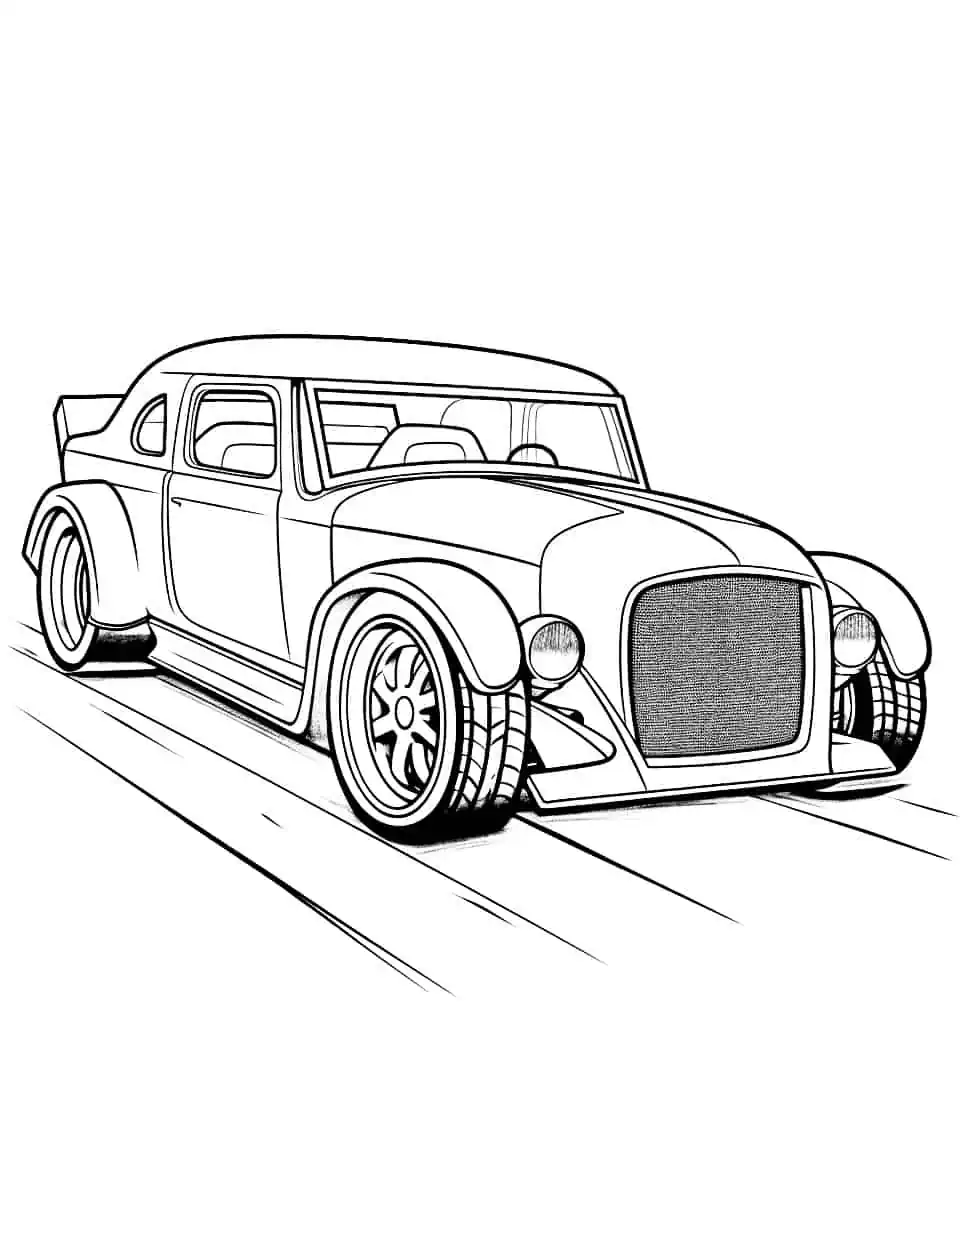 Hot Rod Heaven Car Coloring Page - A detailed image of a hot rod, a classic car loved by many.